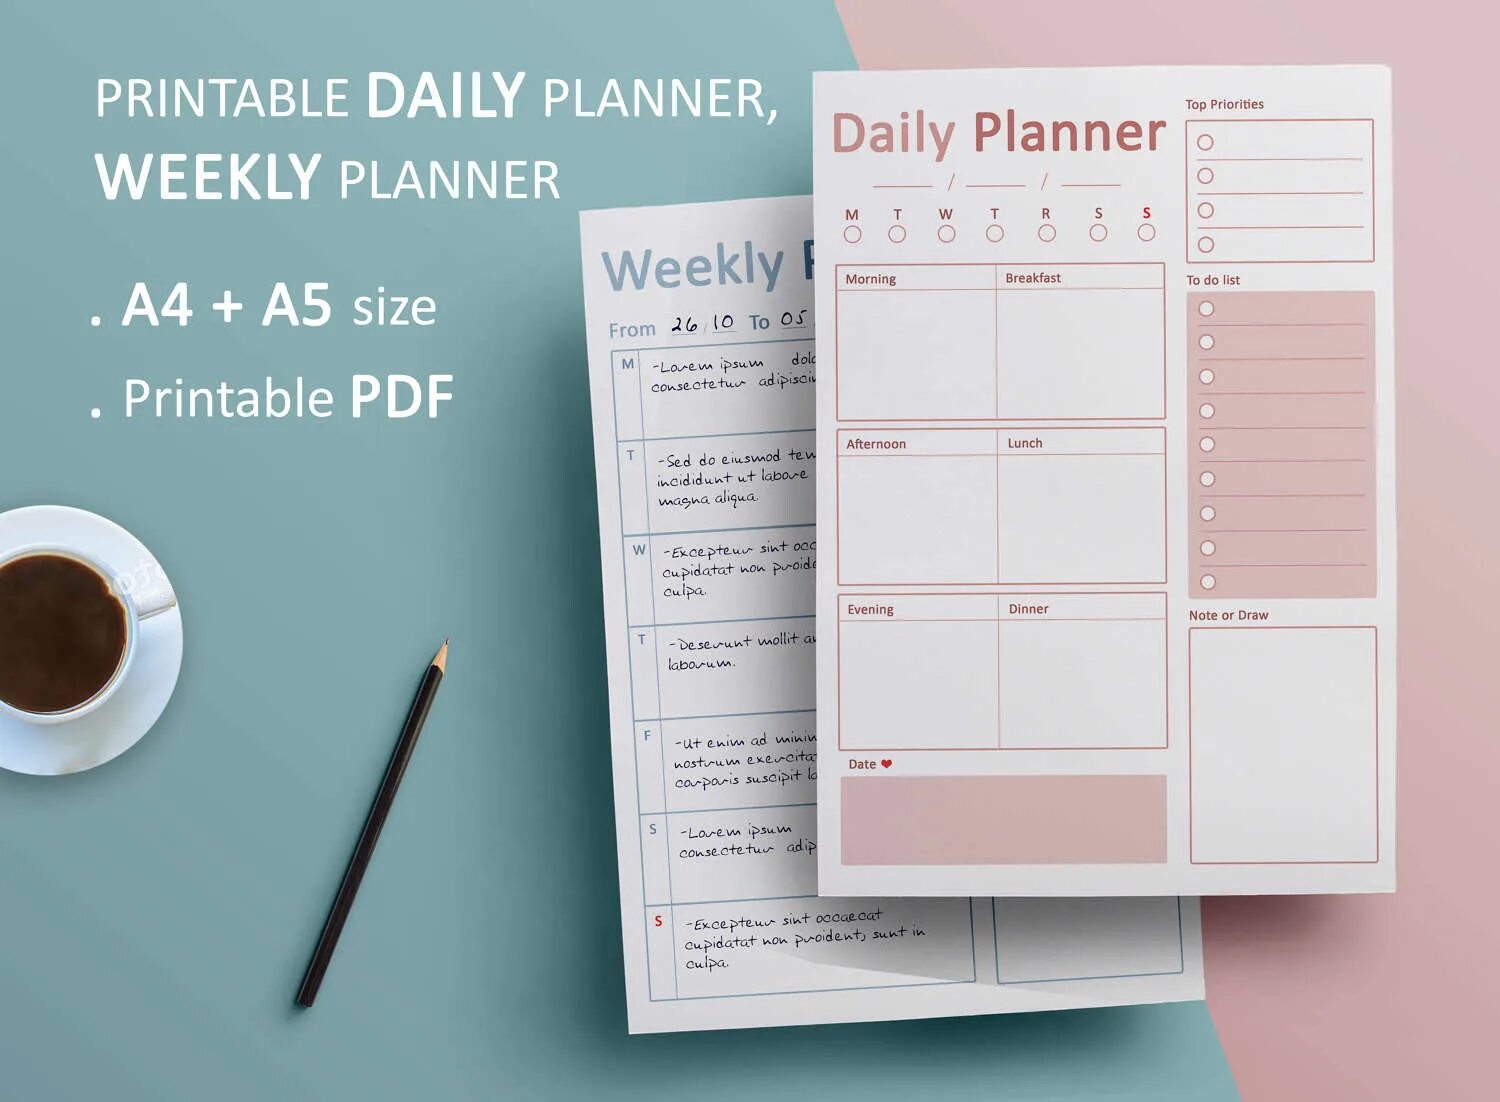 Daily Planner. Daily Planner для печати. Weekly планер. Daily Planner Printable. Plan your day